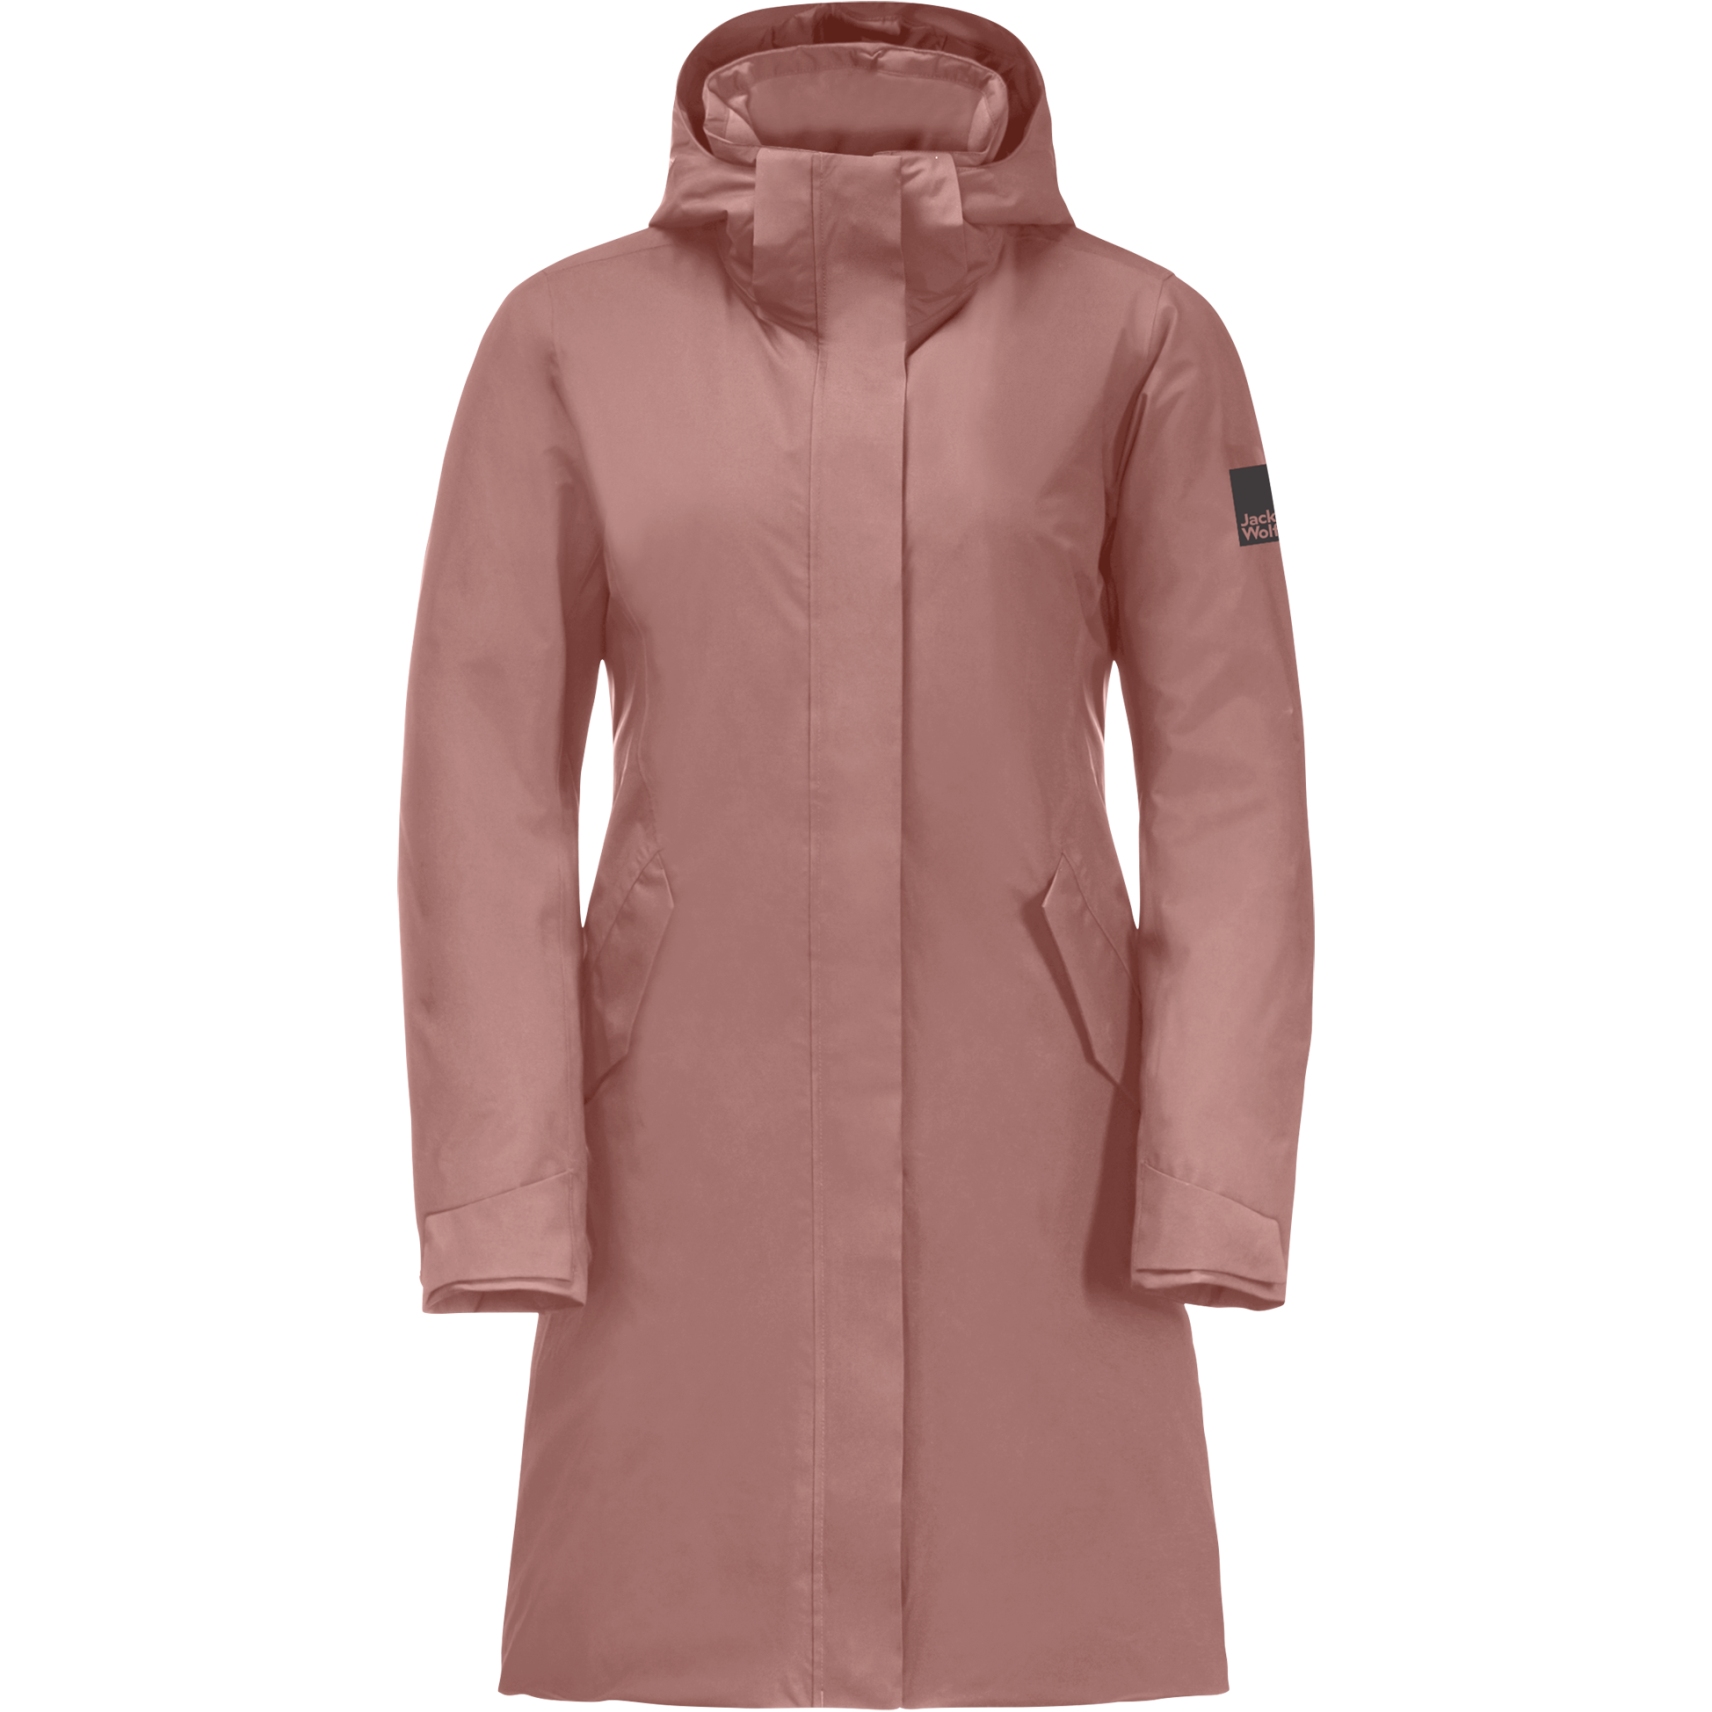 Image of Jack Wolfskin Cold Bay Coat Women - afterglow